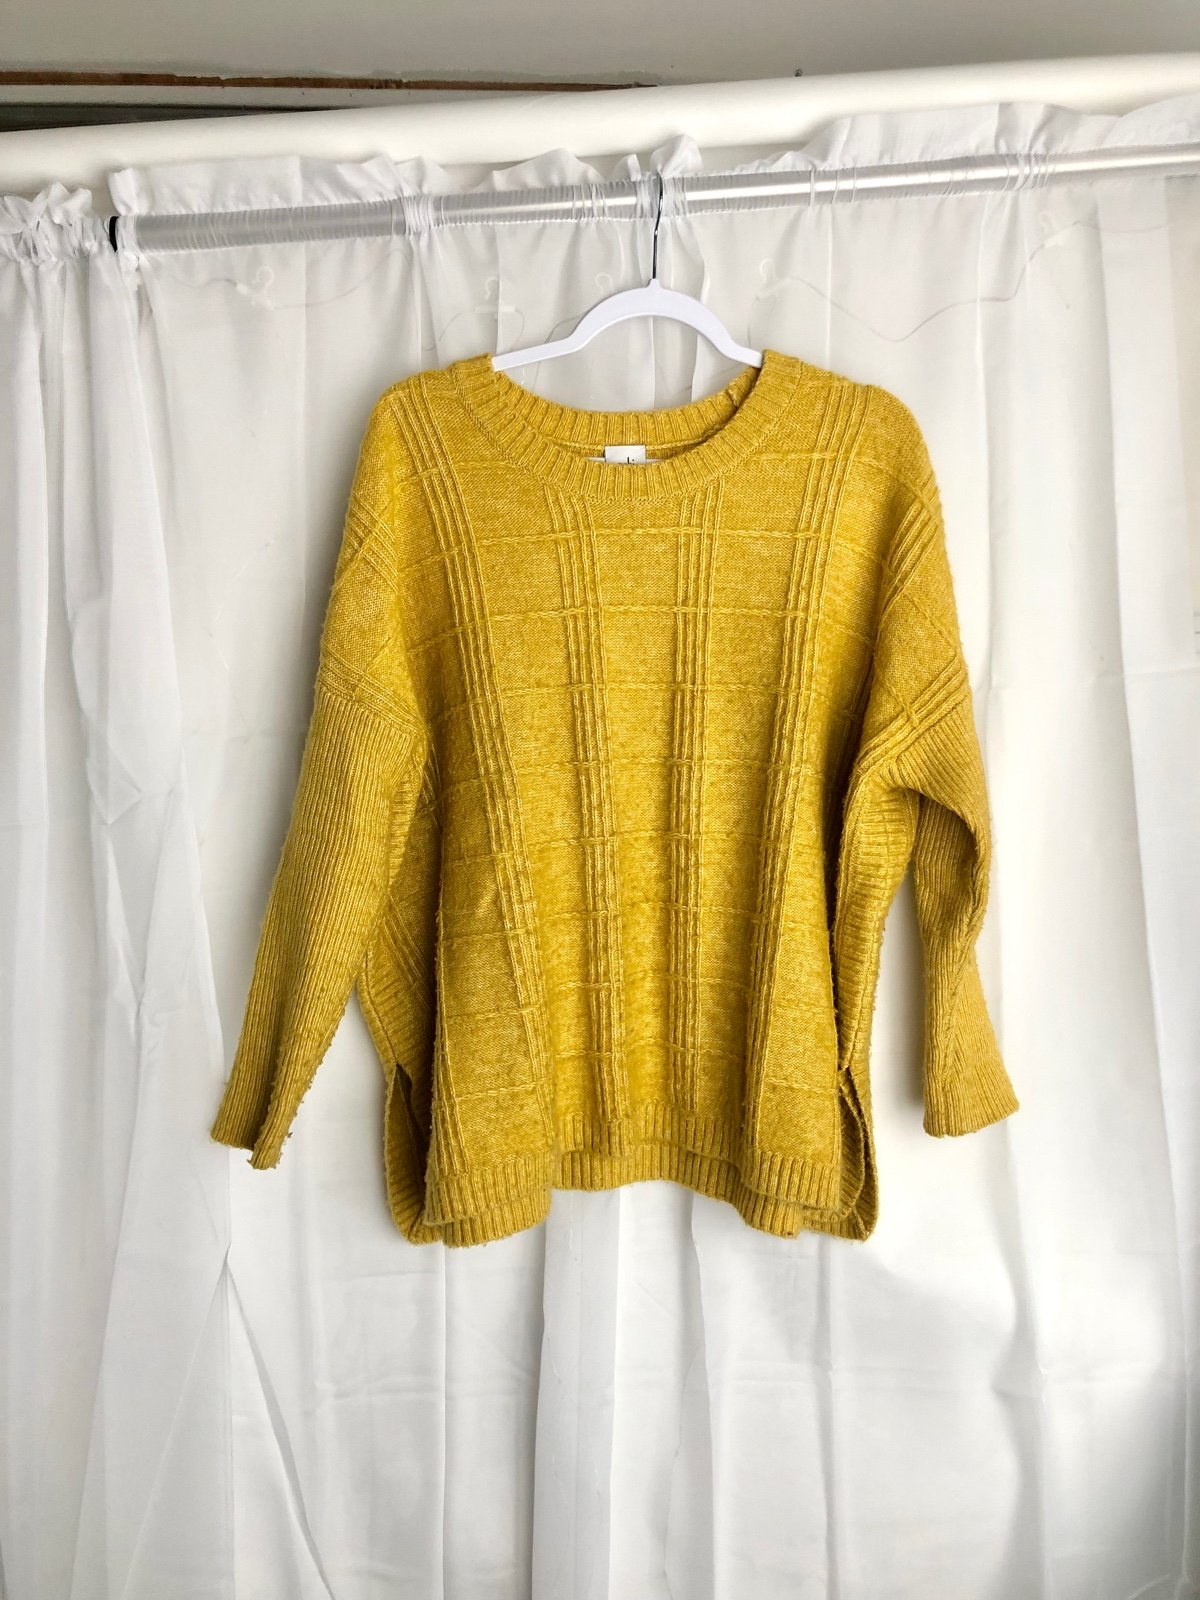 Cabi Style #4079 Stitch Mix Mustard Oversized Pullover Sweater Size Womens Small eitGhHrZW